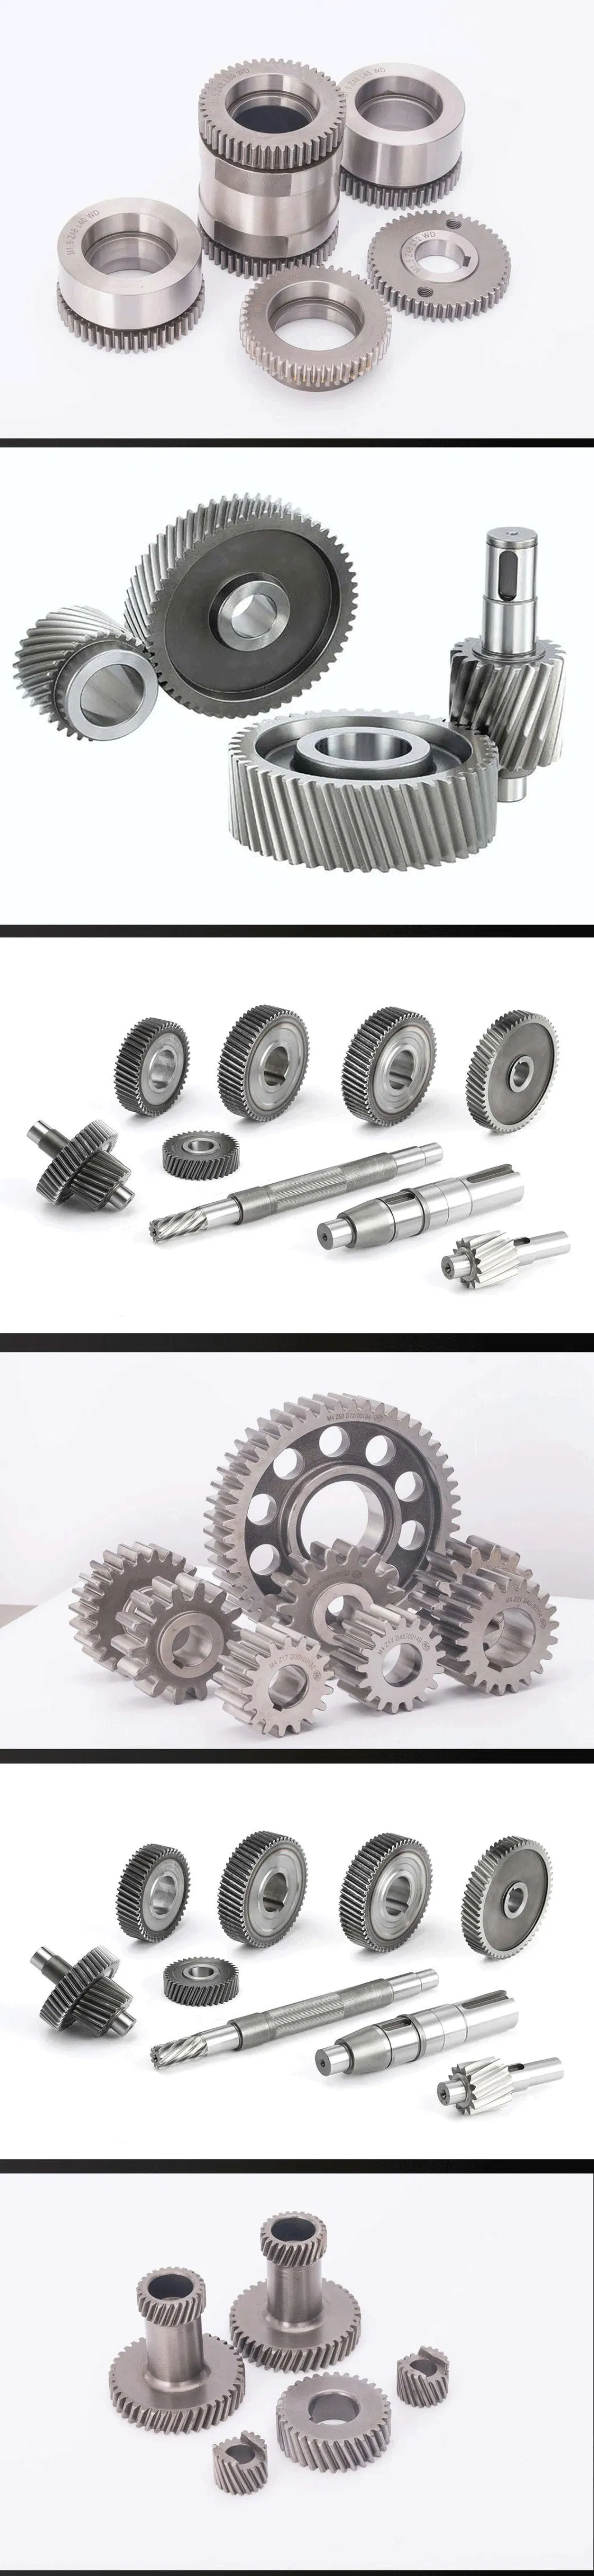 OEM Metal Bonze Machine Spline Wheel Transmission Drive Starter Involute Toothed Shaft Gearbox Reduction Power Tool Cylinder Custom Pinion Precision Worm Gear